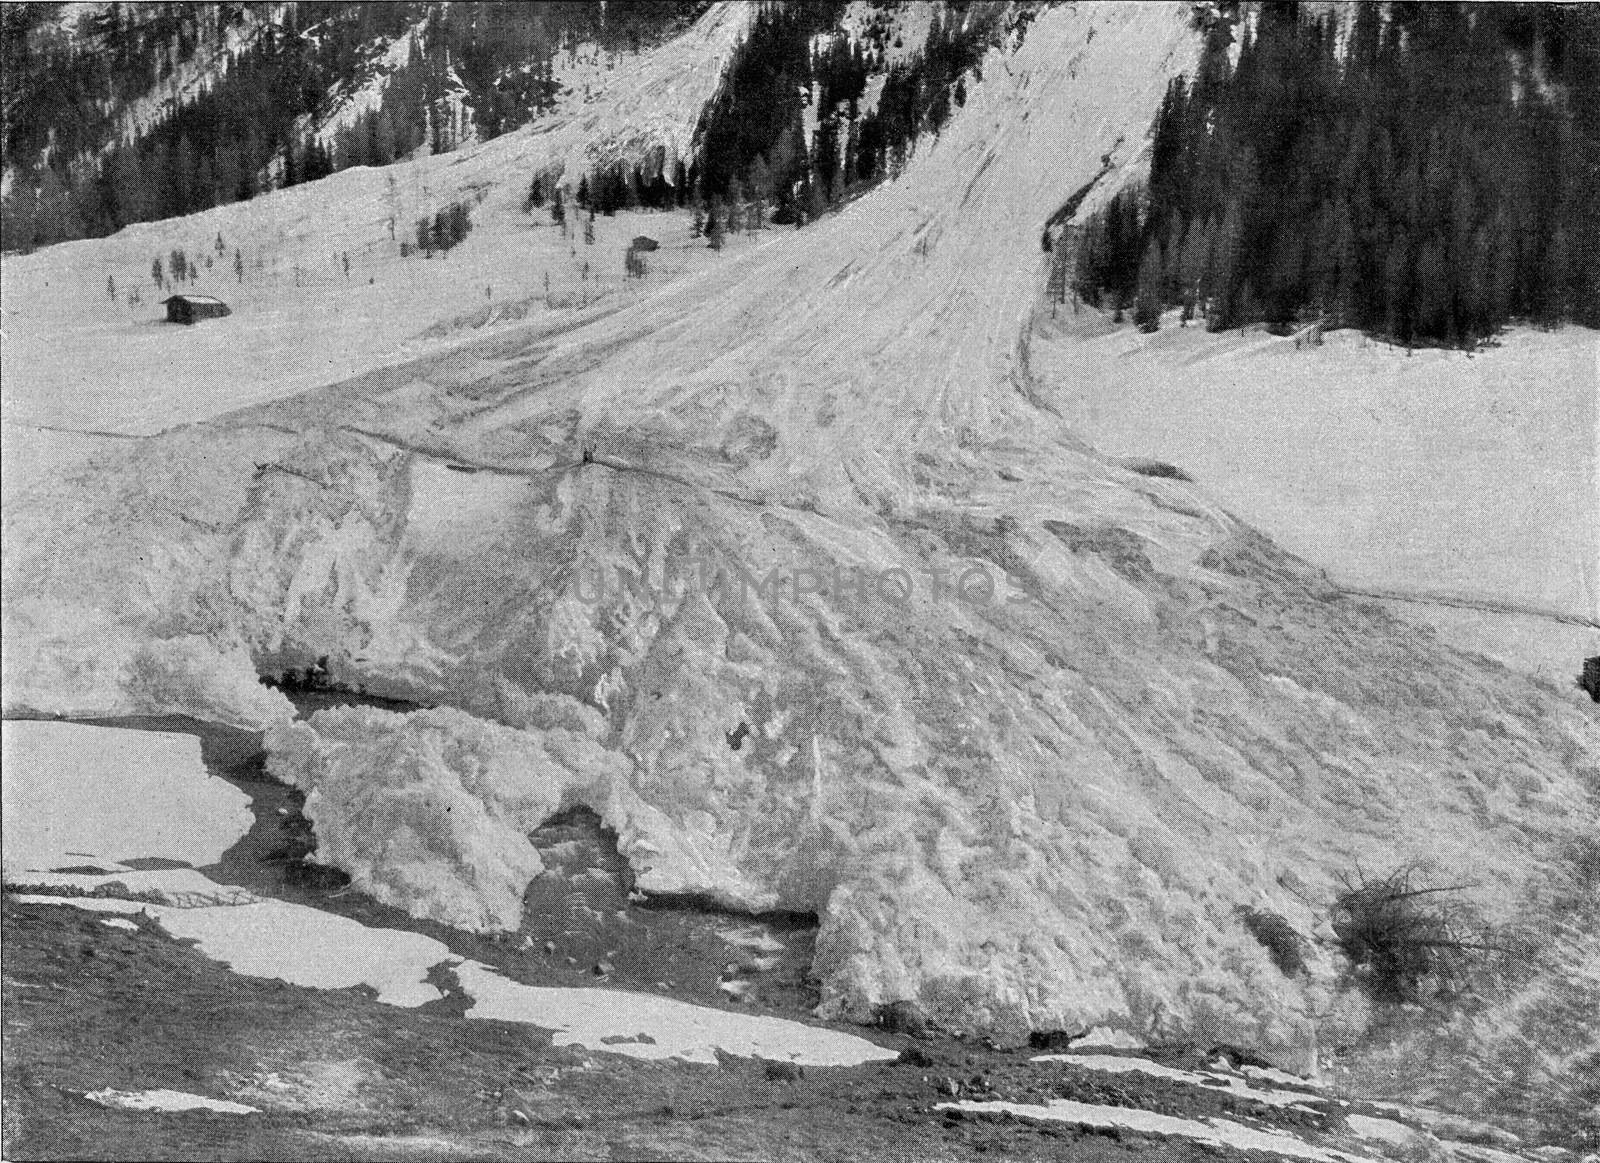 End point of a spring avalanche at the Scaletta Pass in the Enga by Morphart